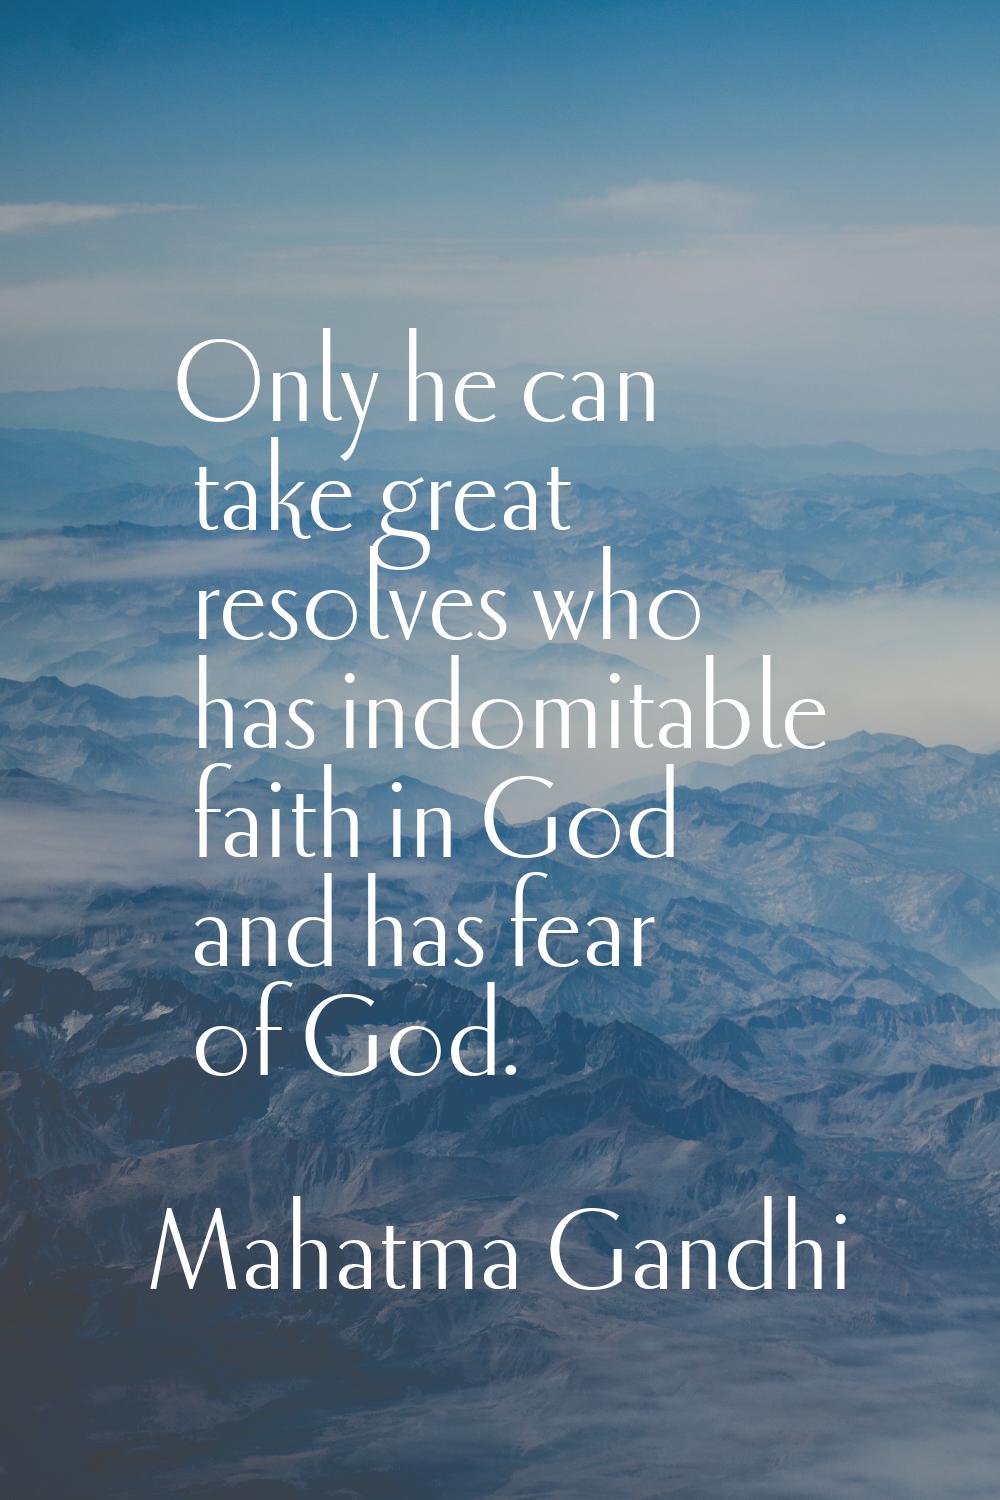 Only he can take great resolves who has indomitable faith in God and has fear of God.